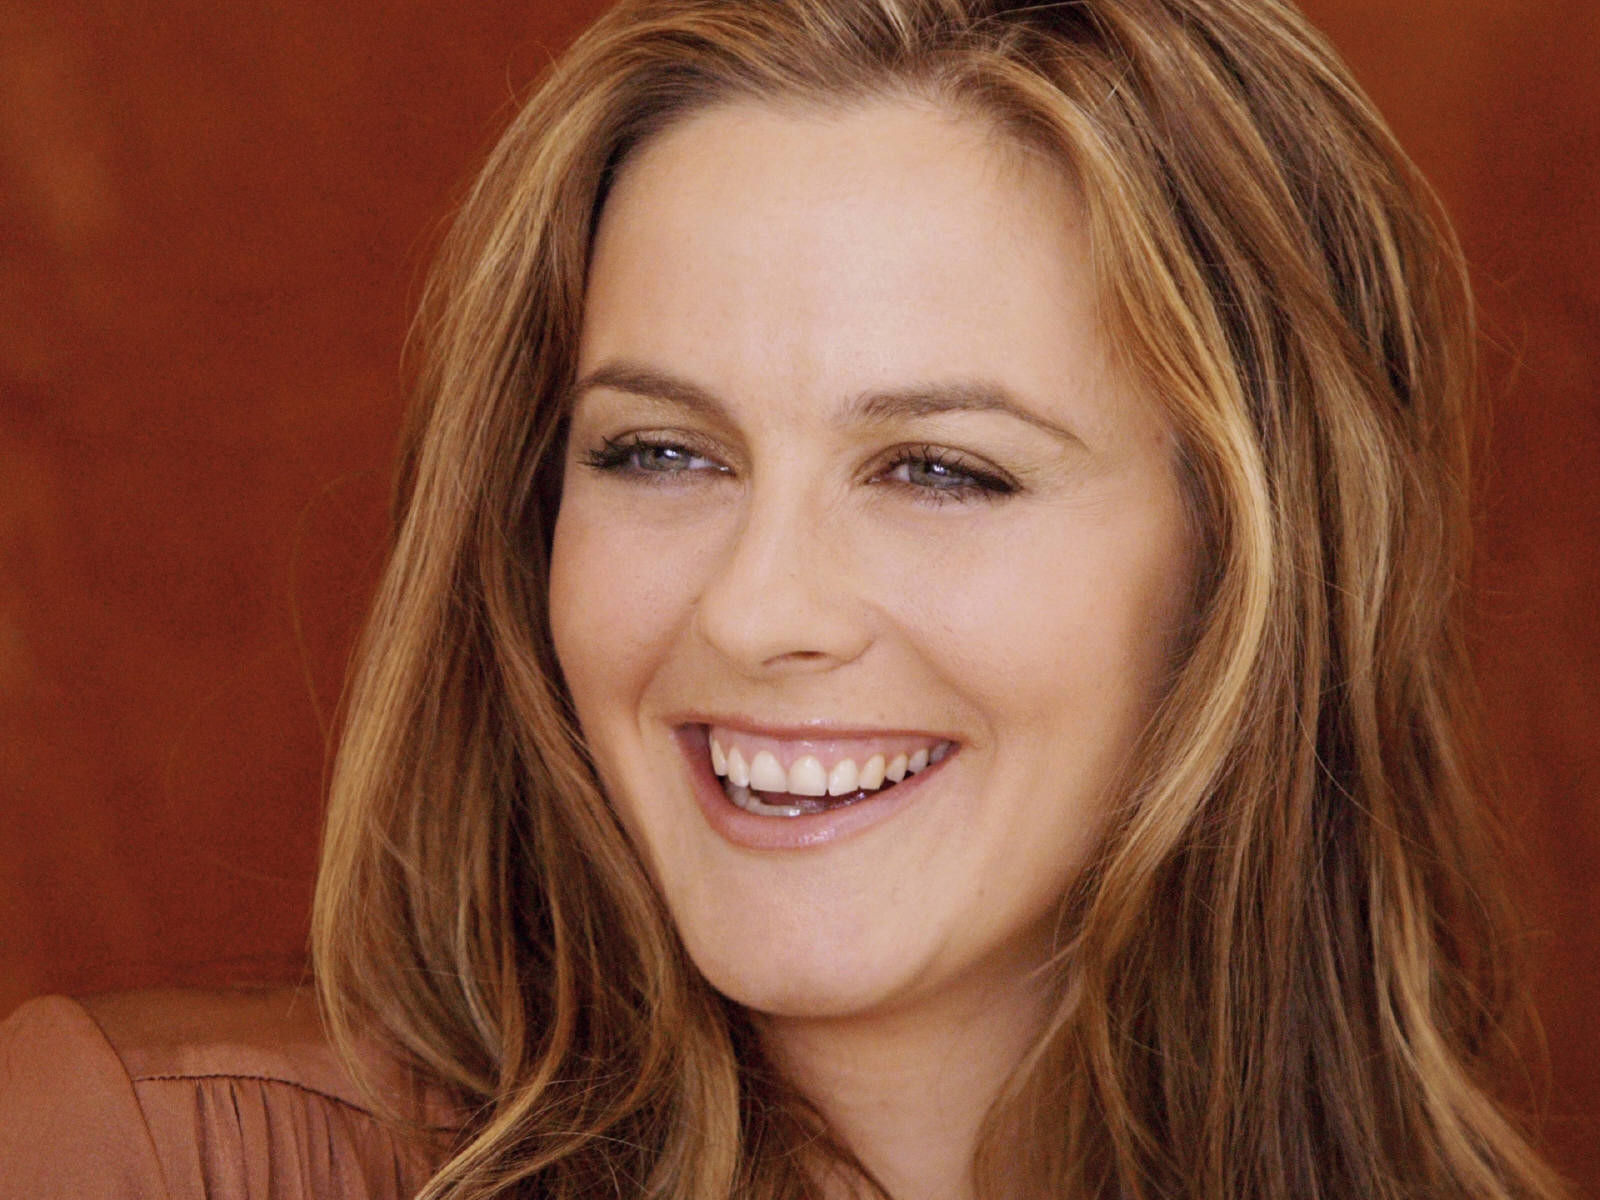 Alicia Silverstone Romance Hairstyles Pictures, Long Hairstyle 2013, Hairstyle 2013, New Long Hairstyle 2013, Celebrity Long Romance Hairstyles 2046